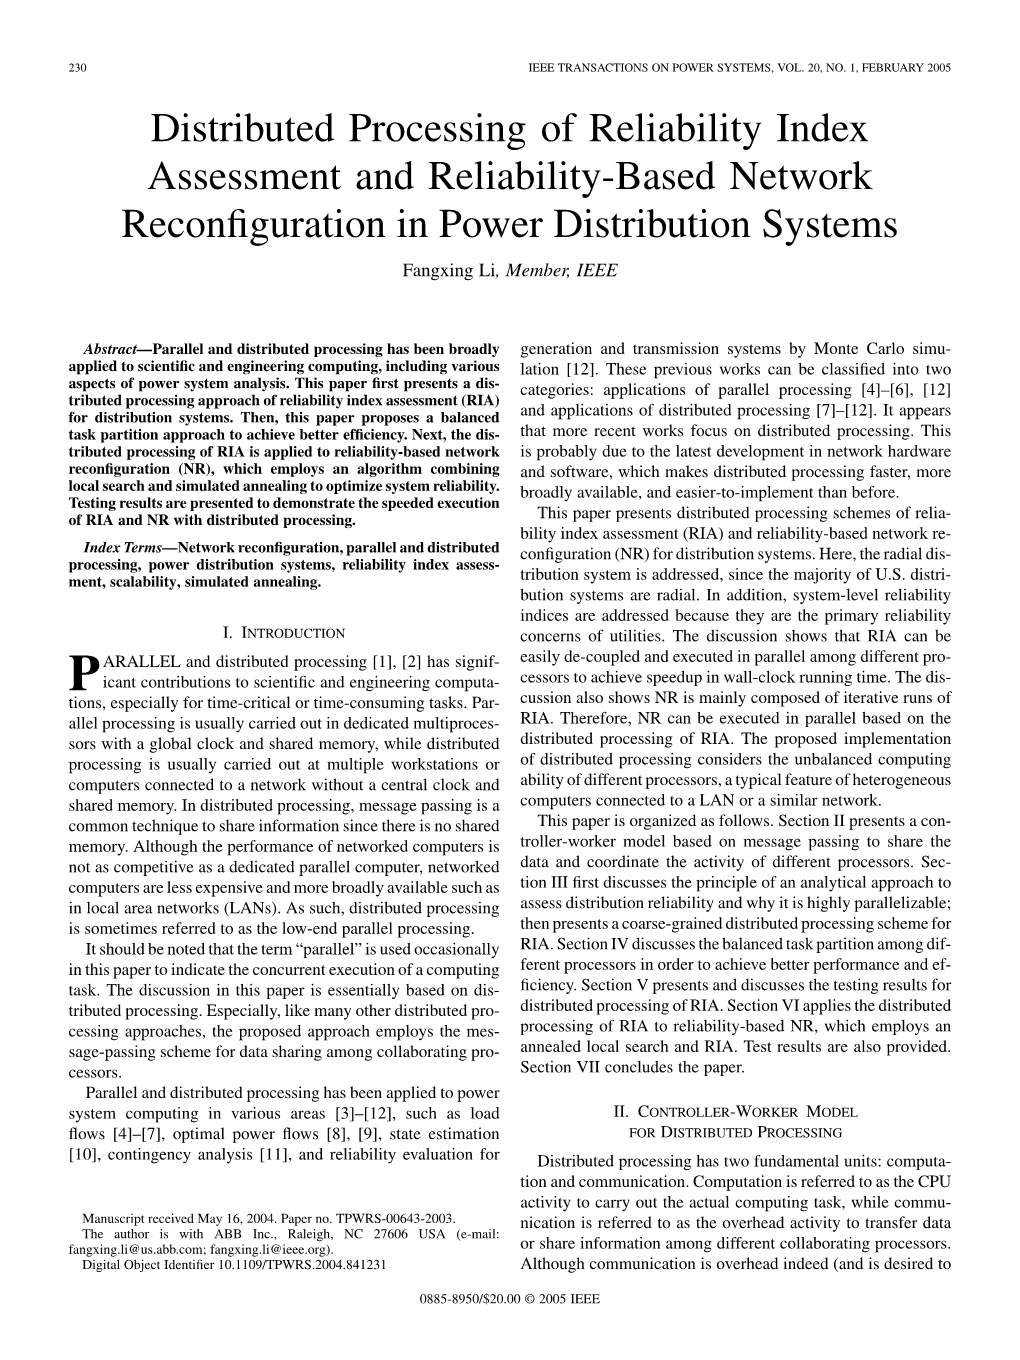 Distributed Processing of Reliability Index Assessment and Reliability-Based Network Reconﬁguration in Power Distribution Systems Fangxing Li, Member, IEEE